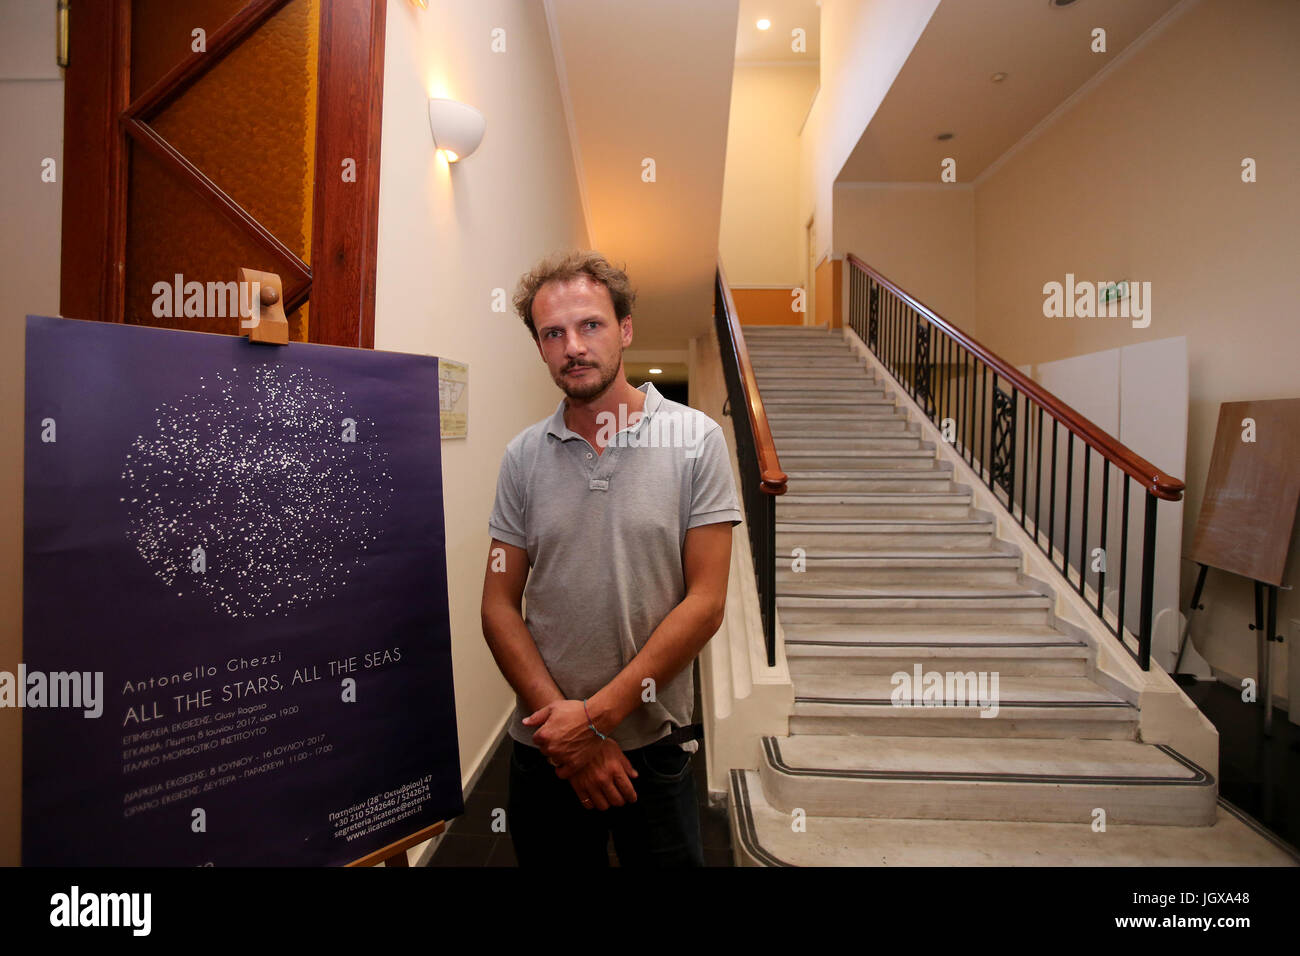 (170711) -- ATHENS, July 11, 2017 (Xinhua) -- Photo taken on July 5 shows Italian artist Paolo Ghezzi at the entrance of the exhibition 'All the Stars, All the Seas' in Athens, Greece. Two years into the crisis which has tested Europe, Italian art collective Antonello Ghezzi chose Greece, a country at the forefront of the mass influx of refugees and migrants, to launch their new project aimed to convey the message of unity and solidarity. 'The exhibition 'All the Stars, All the Seas' is dedicated to the migrants and refugees, to all people adrift and to the fact that we are all united by the s Stock Photo